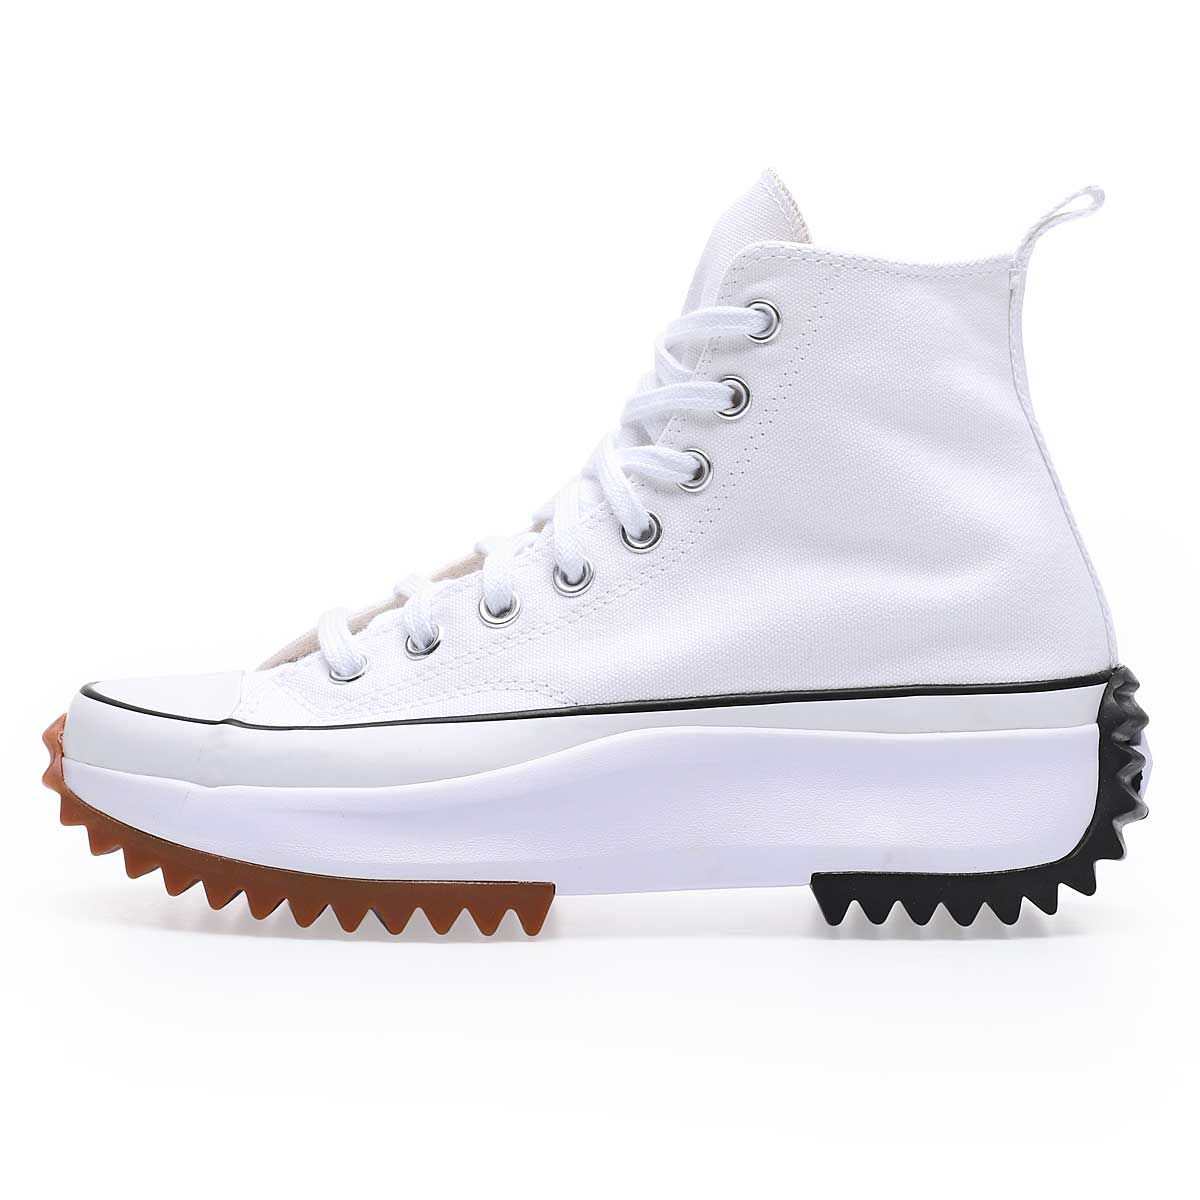 Converse: high-quality products available at KICKZ.com